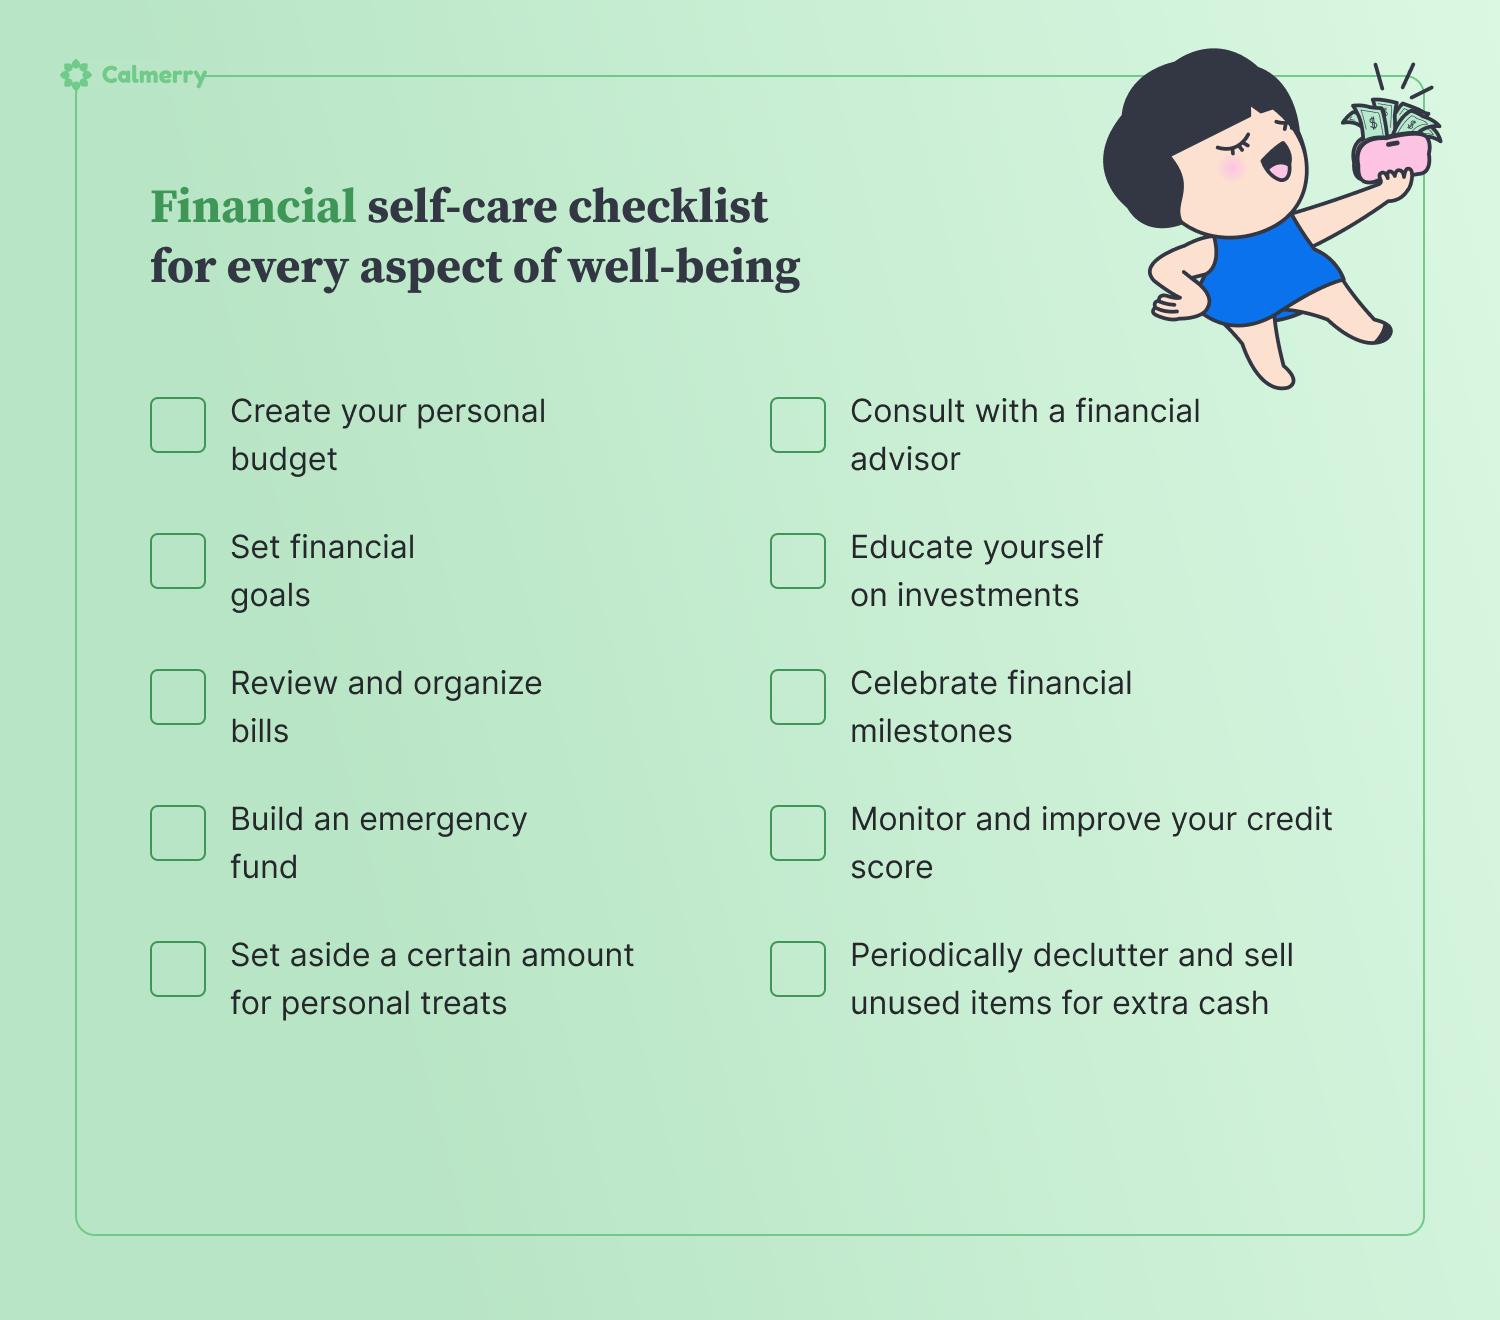 **Financial self-care**  1. Create your personal budget 2. Set financial goals 3. Review and organize bills 4. Build an emergency fund 5. Set aside a certain amount for personal treats 6. Consult with a financial advisor 7. Educate yourself on investments 8. Celebrate financial milestones 9. Monitor and improve your credit score 10. Periodically declutter and sell unused items for extra cash